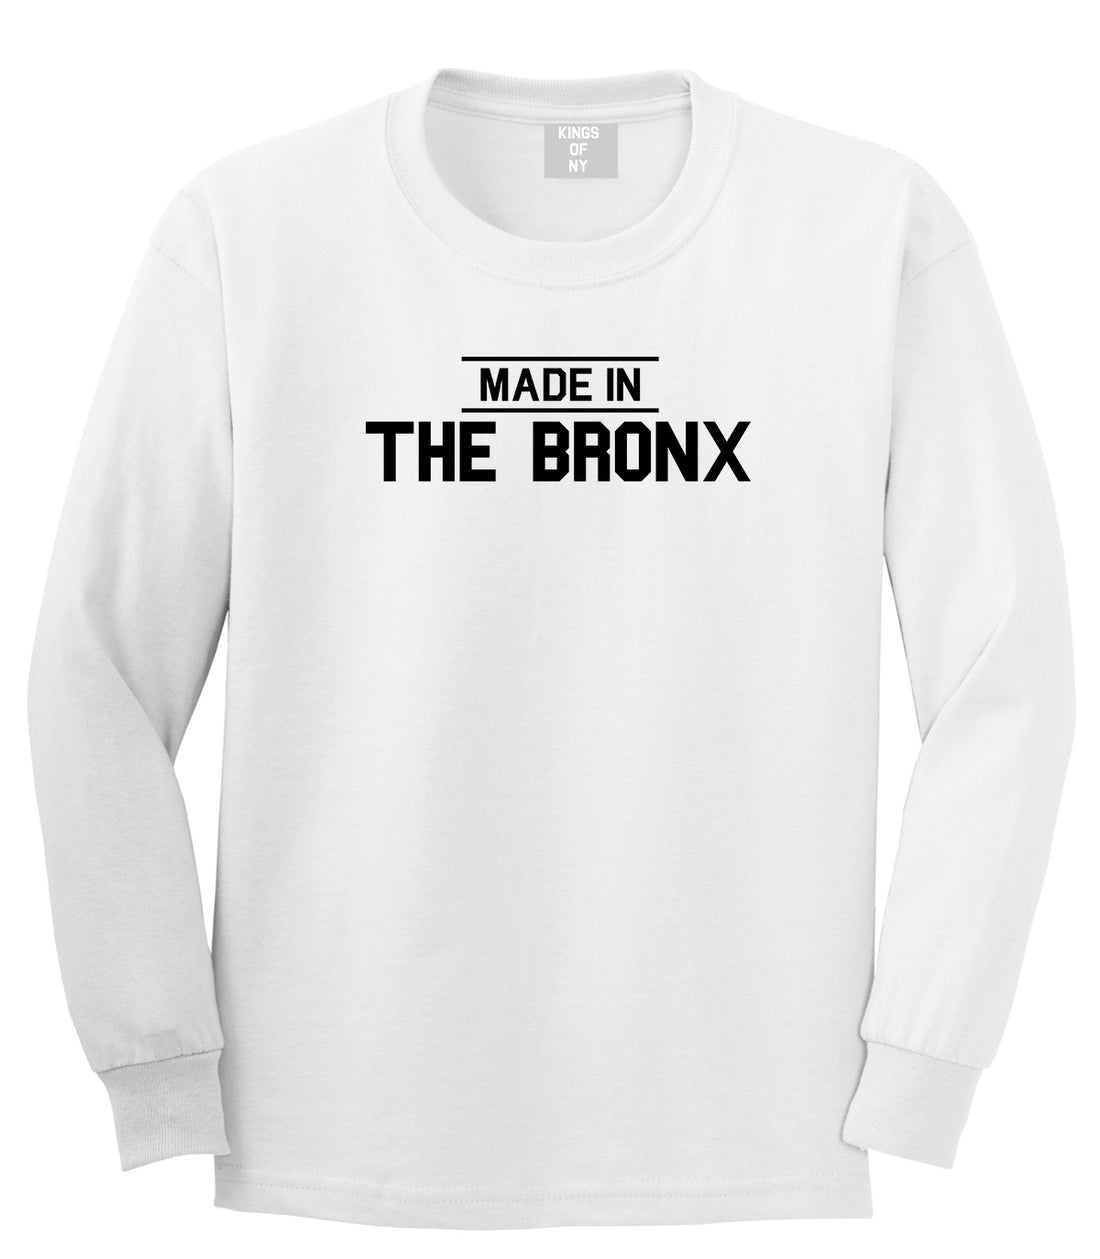 Made In The Bronx Mens Long Sleeve T-Shirt White by Kings Of NY